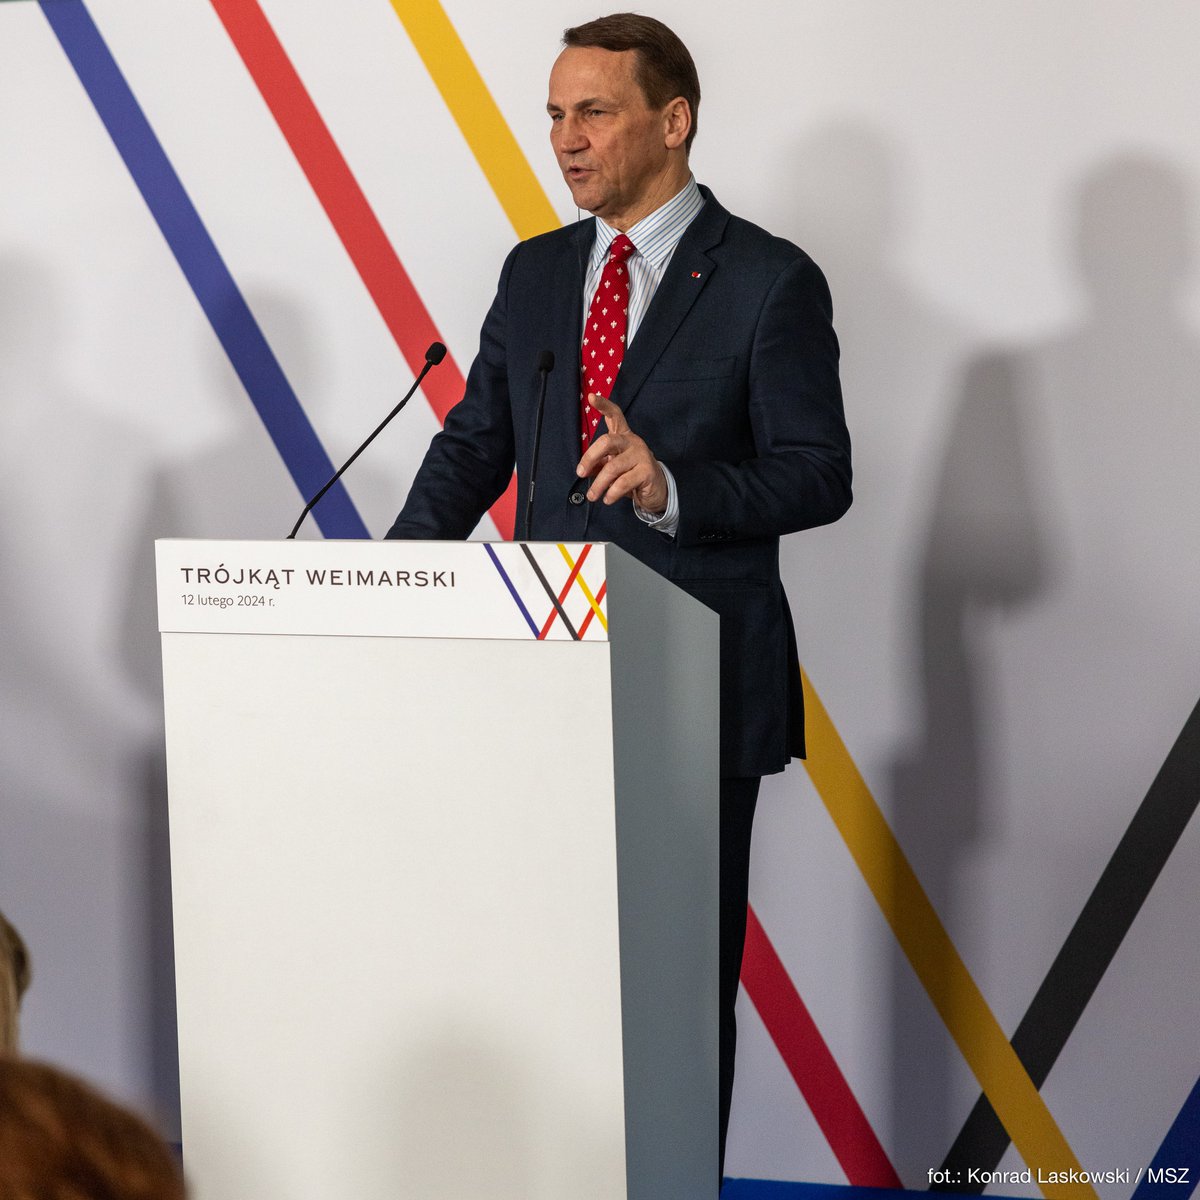 💬 Once again we have a dictator in Europe who, with lies and demagogy, is trying to enslave and conquer 🇺🇦, and to break up the EU and the North Atlantic Alliance. Putin must not be allowed to win this war. | FM @sikorskiradek after the Weimar Triangle Foreign Ministers meeting